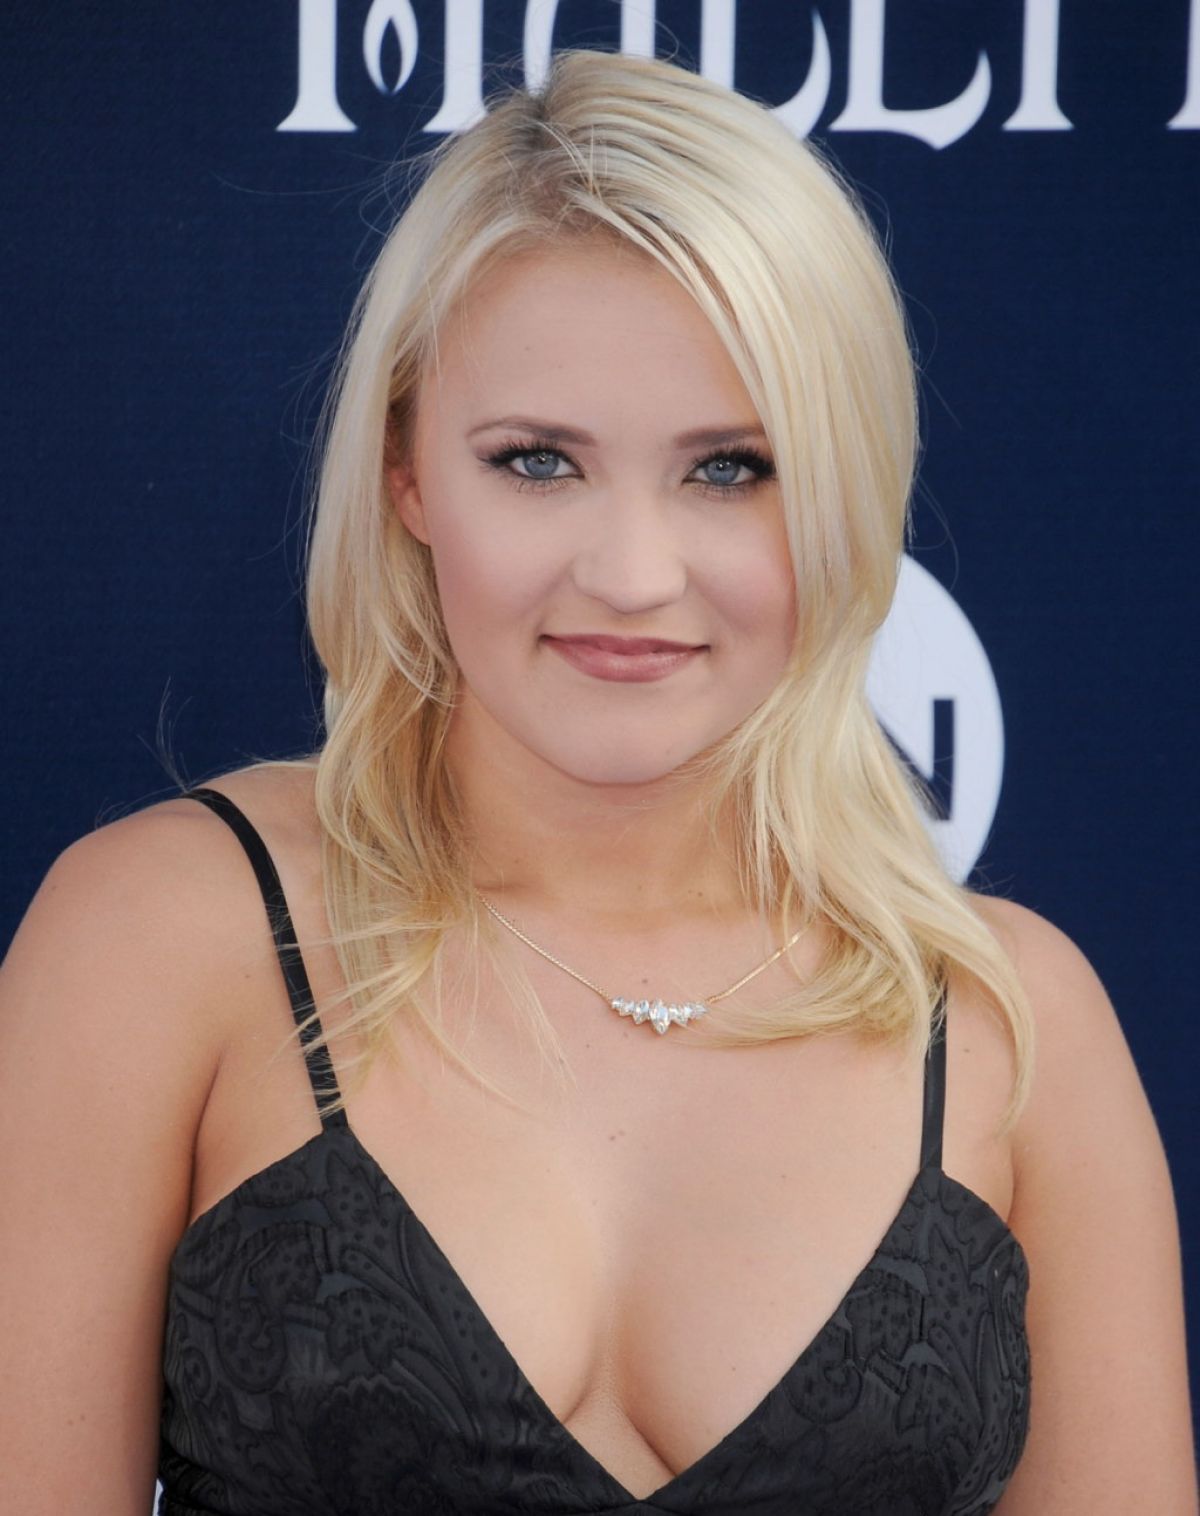 Hot TV Babe Of The Week.Emily Osment.